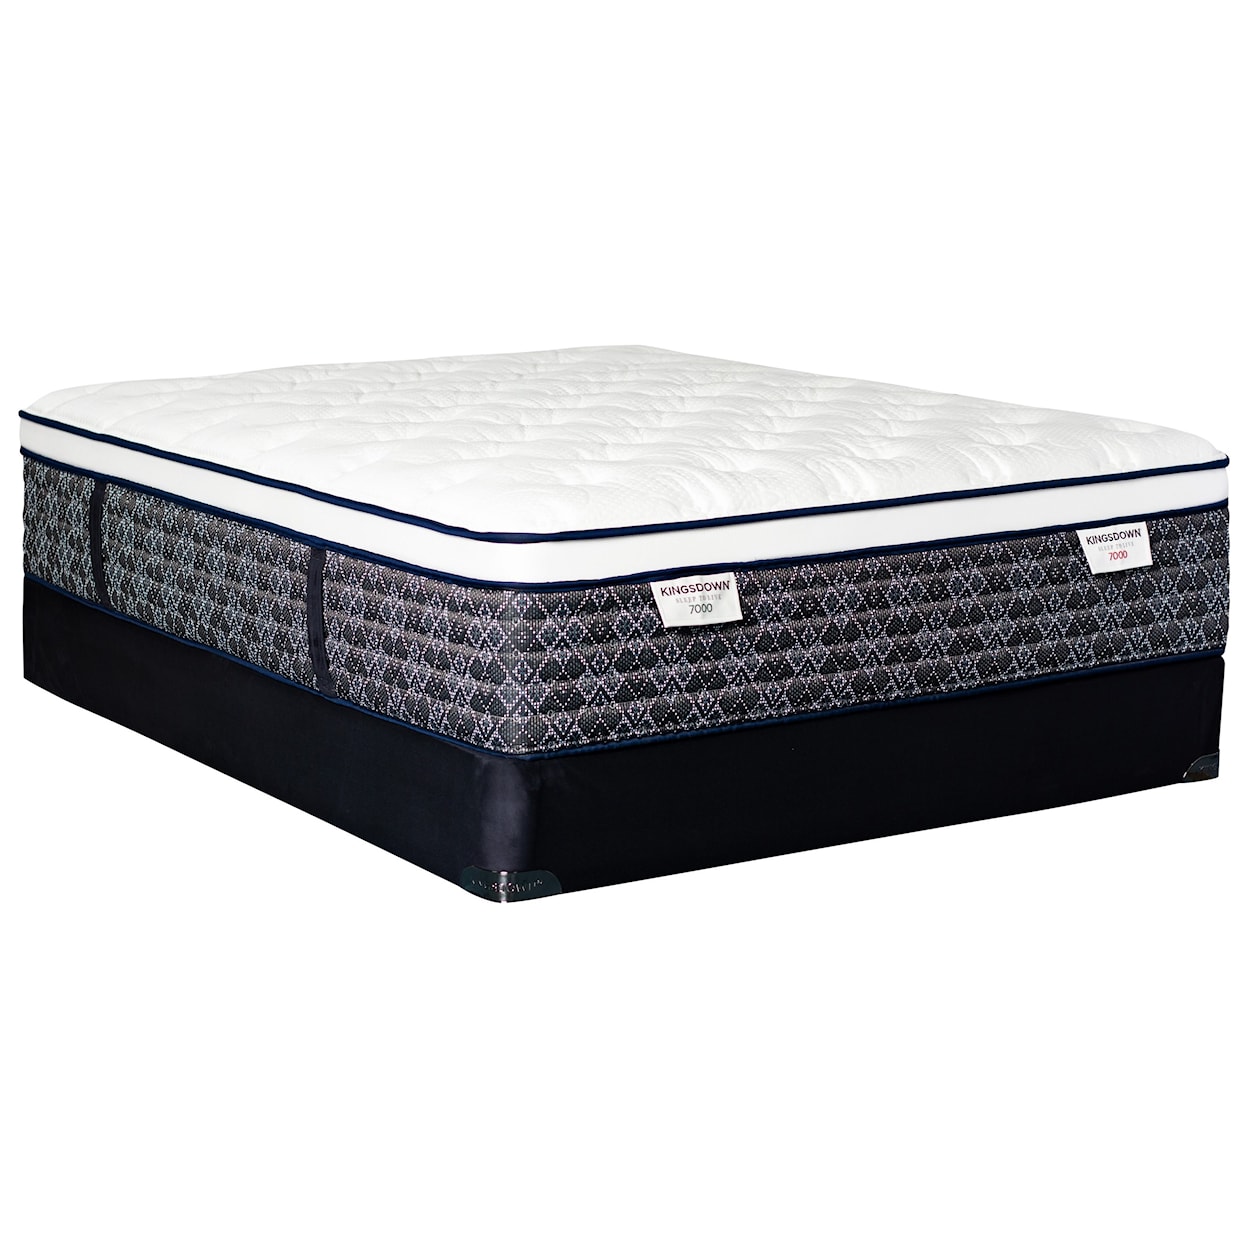 Kingsdown Sleep to Live 7000 Green Red ET King Pocketed Coil Mattress LoPro Set